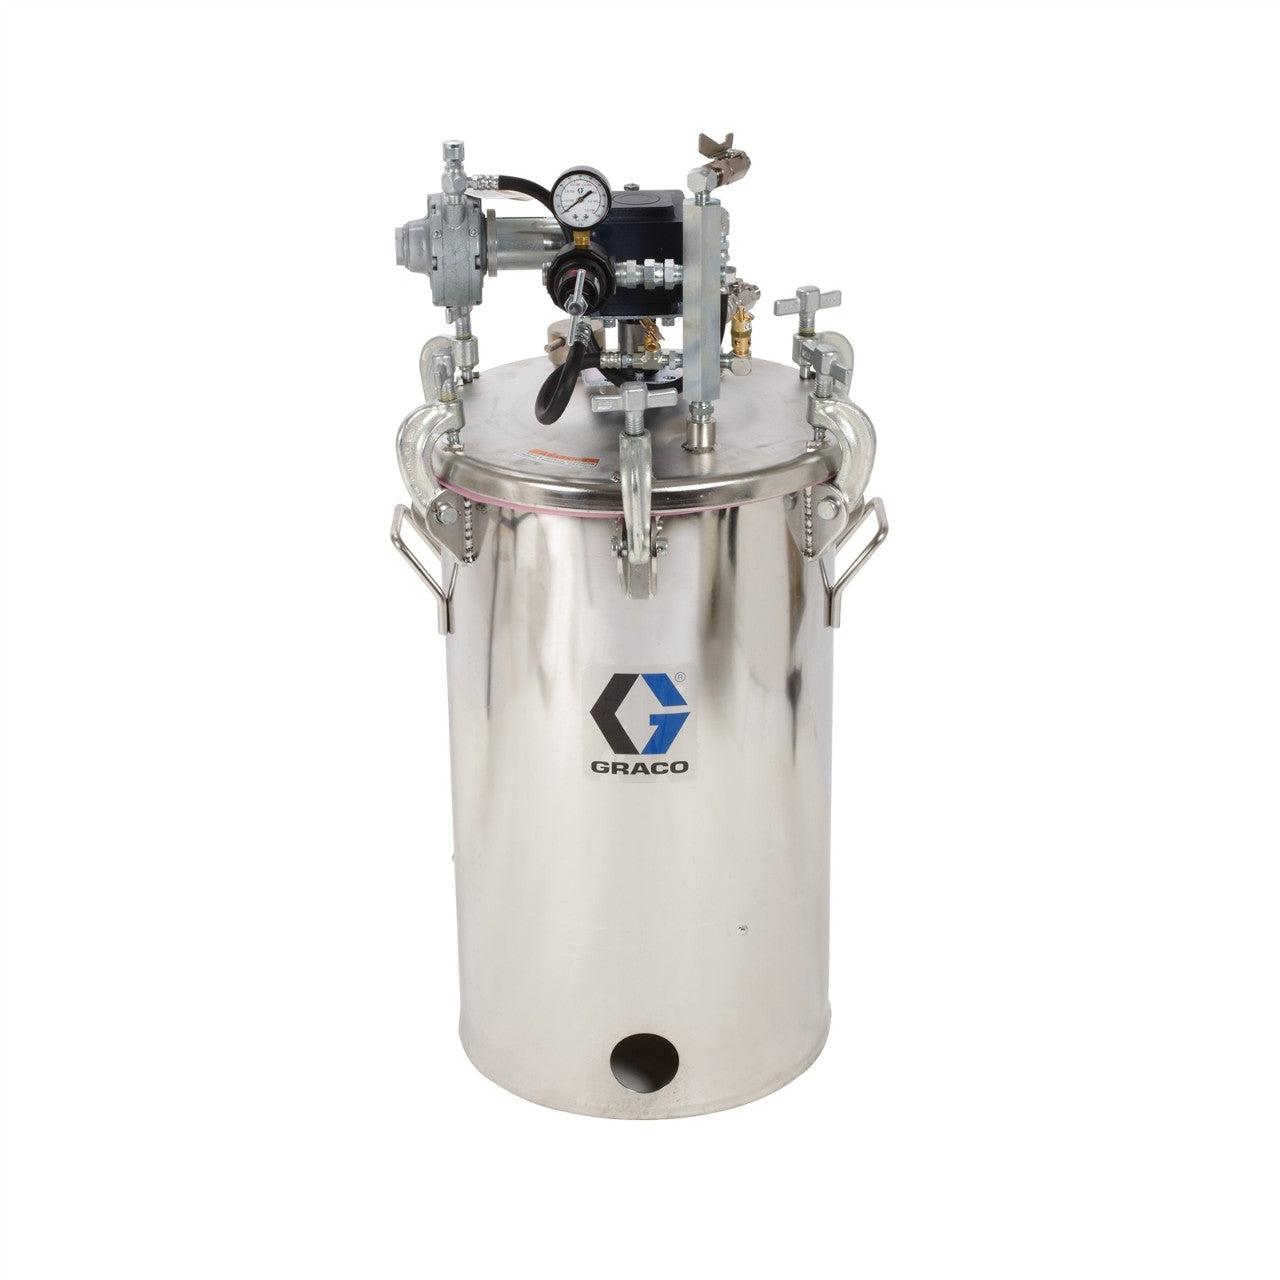 10 Gallon High Pressure (HVLP) Pot with Agitator, Regulated to 100 psi, ASME Rated, 33.9 in (88 cm), 85 lbs (39 kg), SST